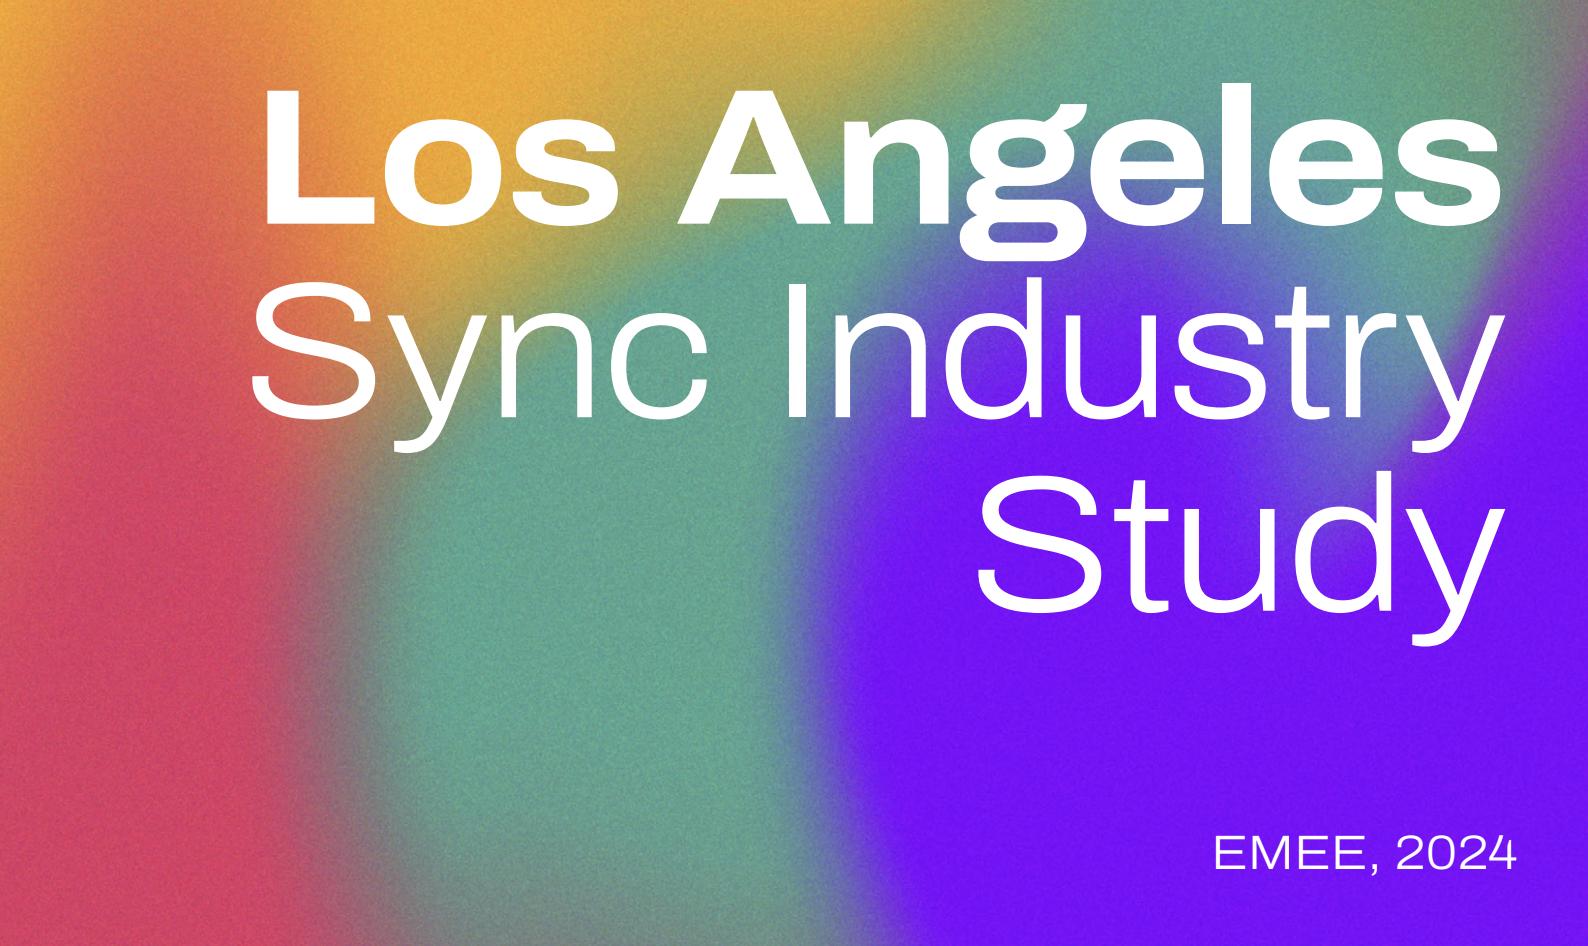 New Study: Los Angeles Sync Industry